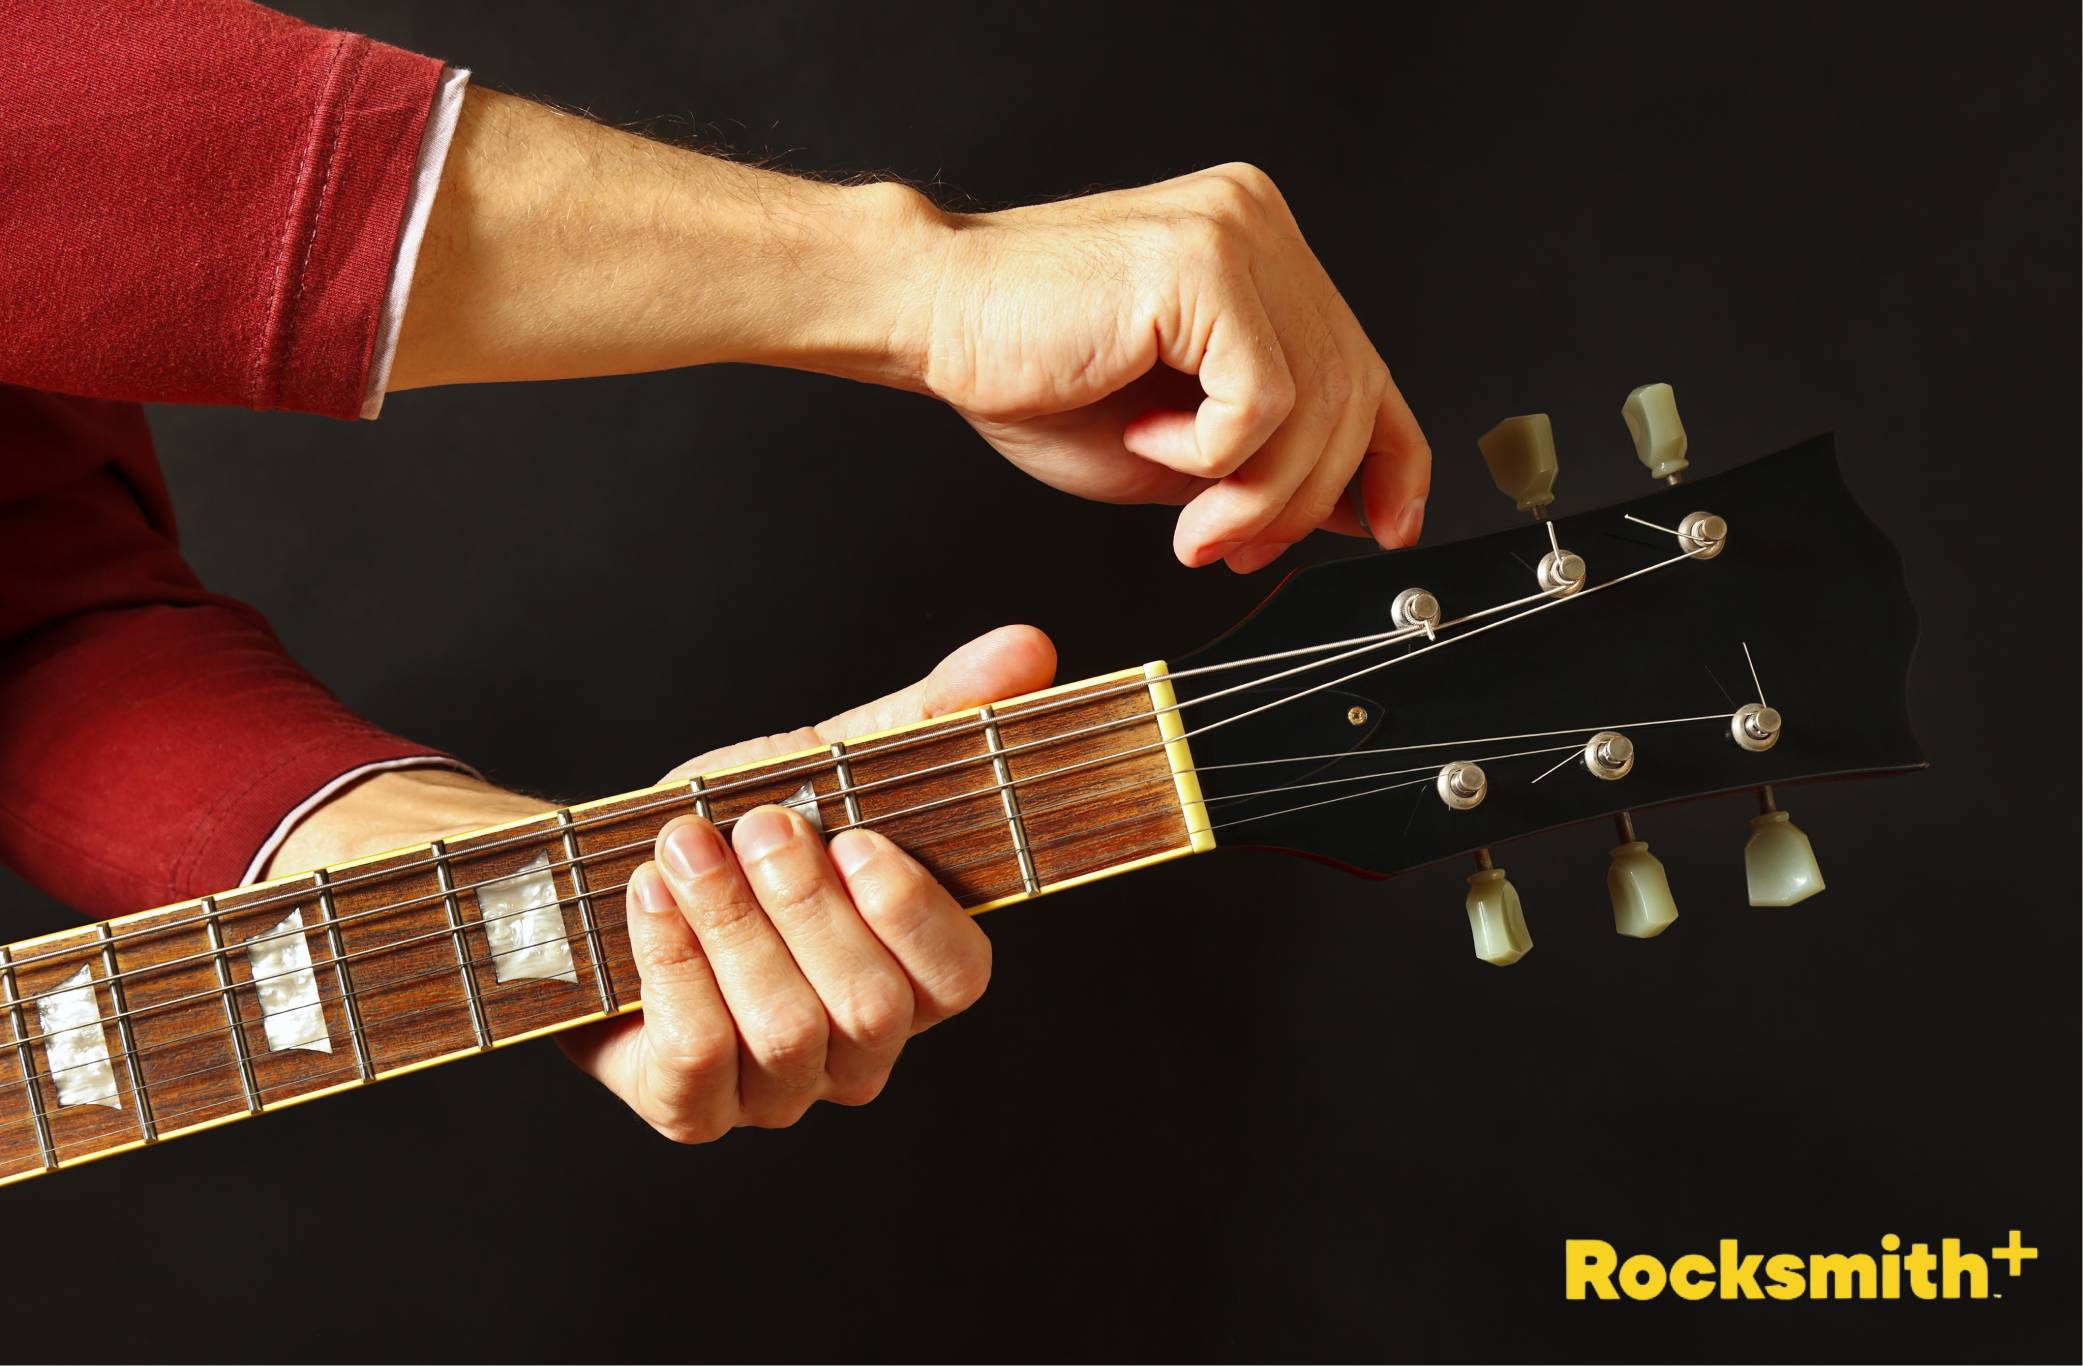 [RS+] Open C Tuning: How To Tune Your Guitar to Open C SEO ARTICLE - open c